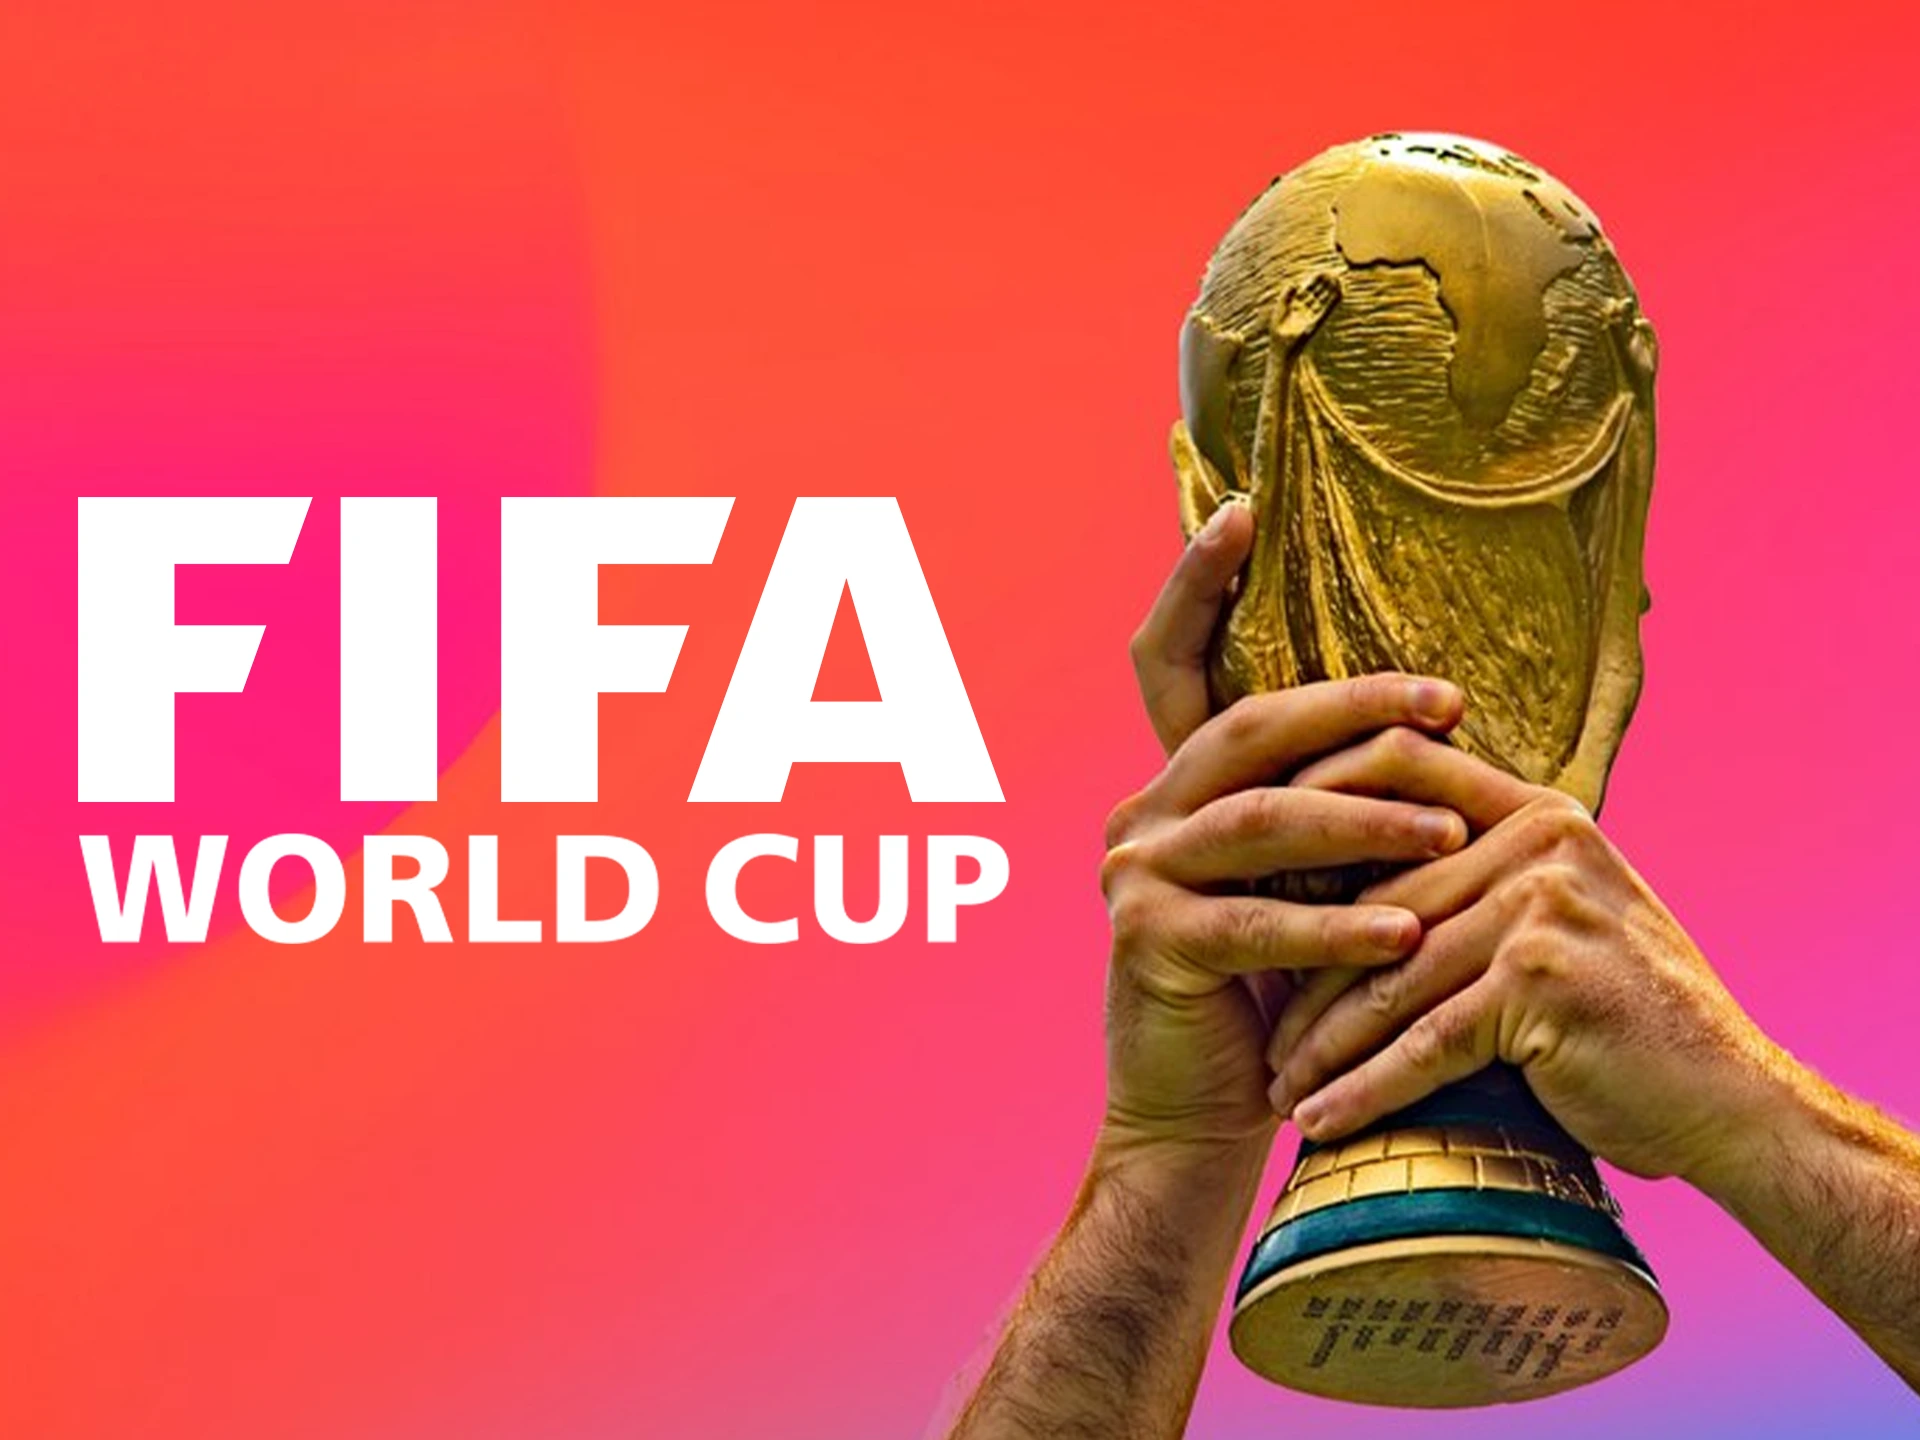 One of the most popular events for football betting is the FIFA World Cup.